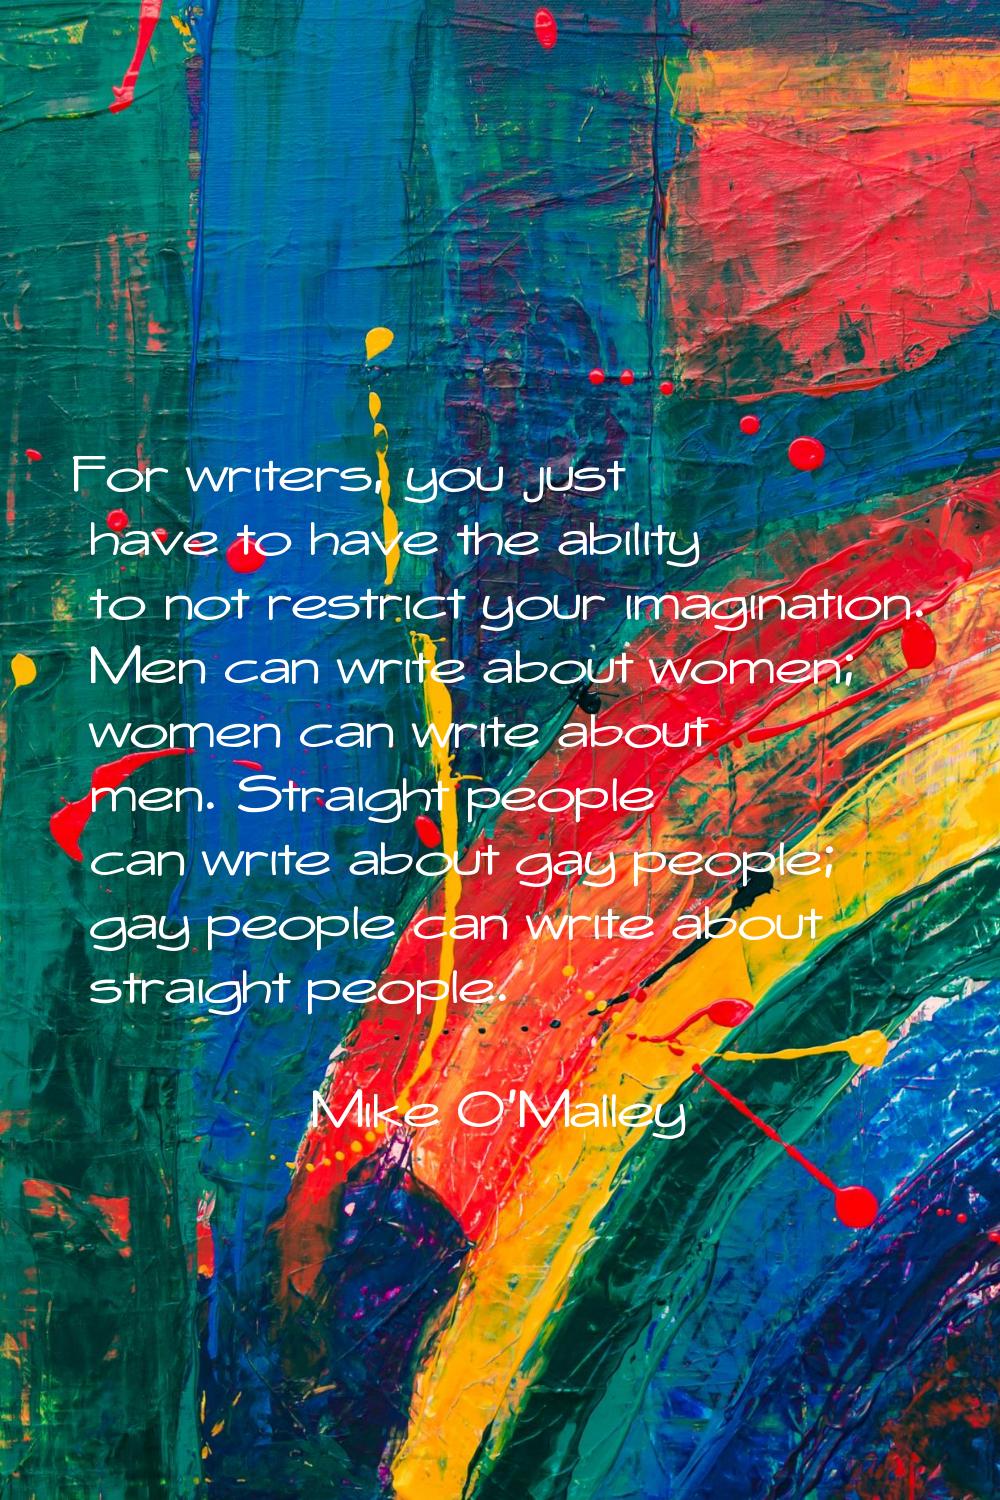 For writers, you just have to have the ability to not restrict your imagination. Men can write abou